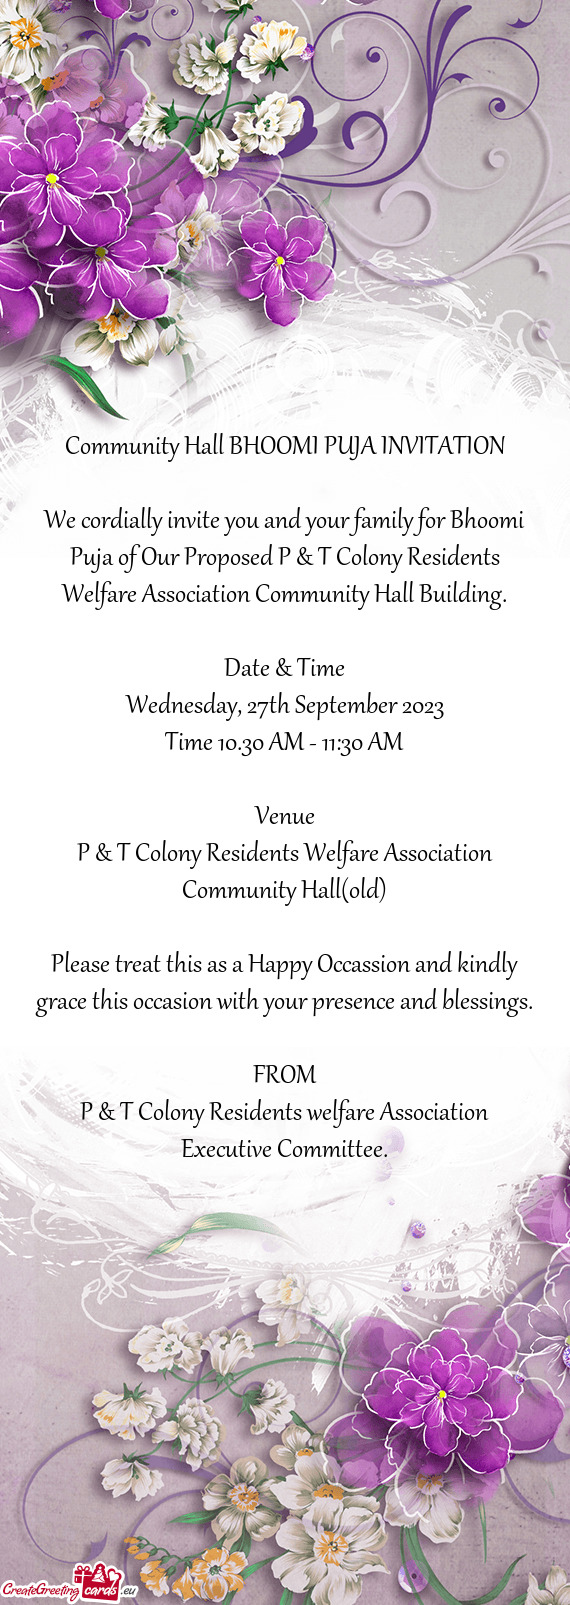 We cordially invite you and your family for Bhoomi Puja of Our Proposed P & T Colony Residents Welfa